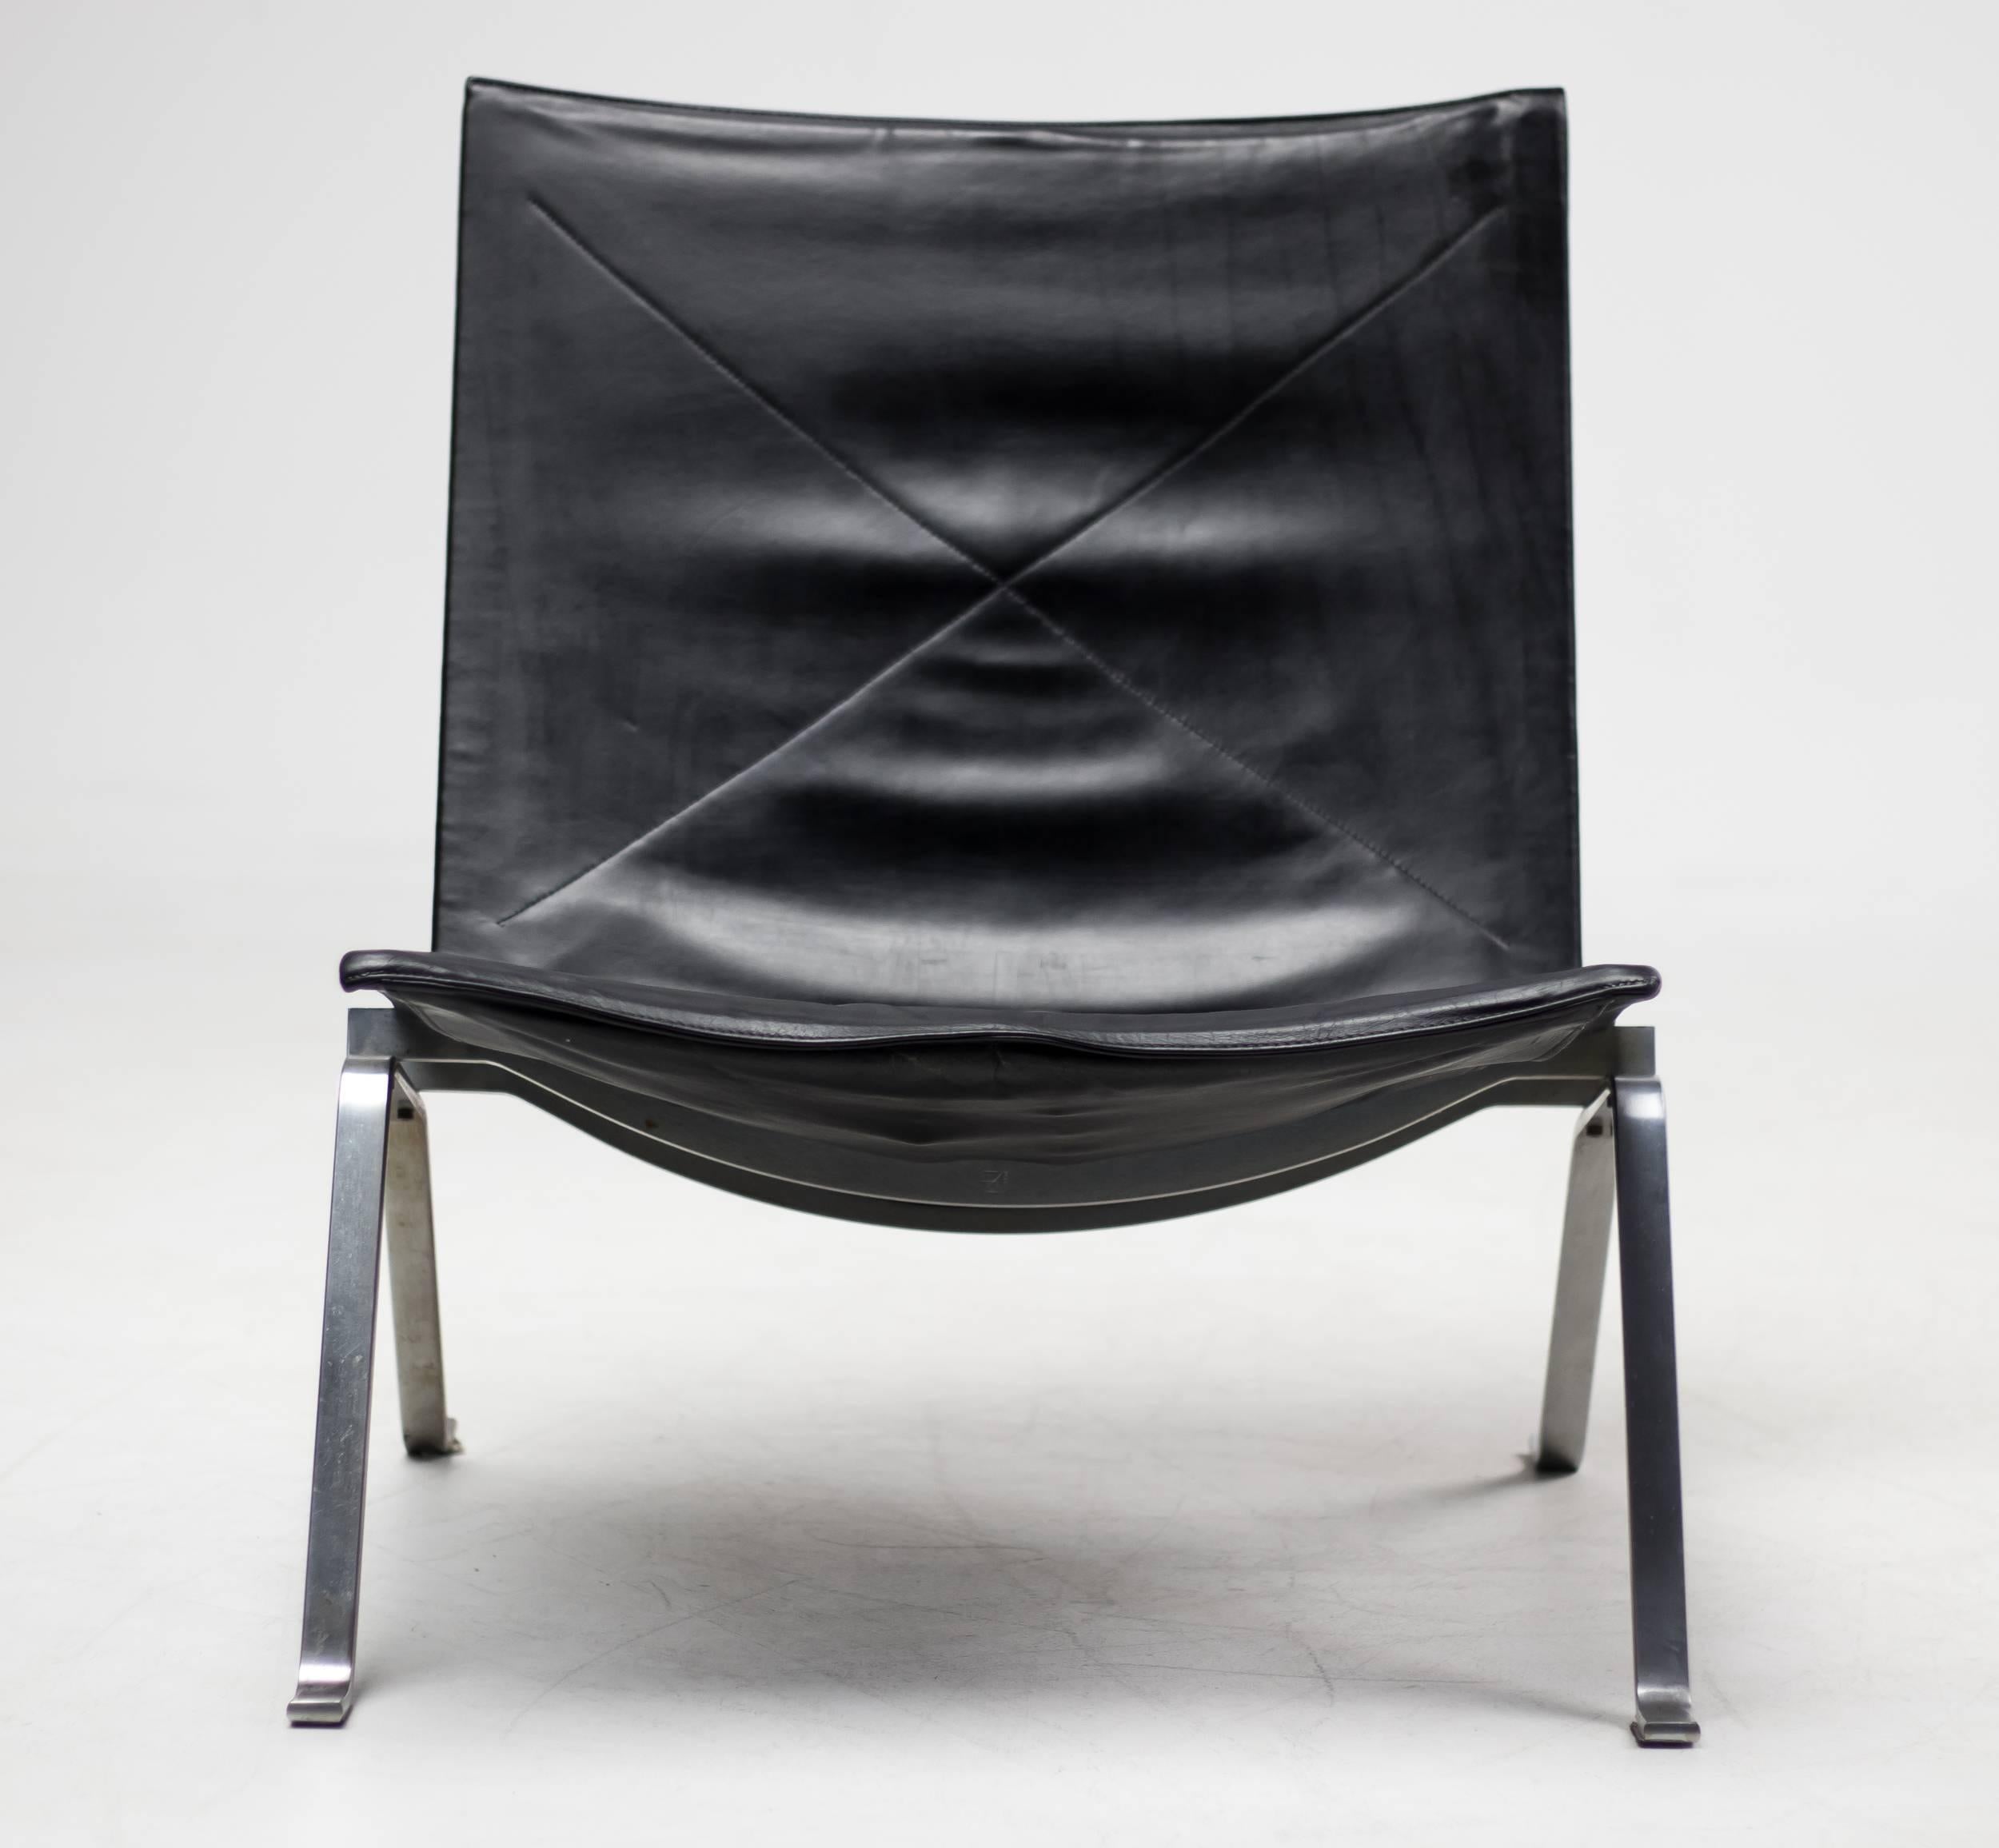 PK 22 chair designed by Poul Kjaerholm in the original black leather. 
E. Kold Christensen edition, the matte chrome frame embossed with EKC logo.

Excellent fast and affordable worldwide shipping.
White glove delivery available upon request.